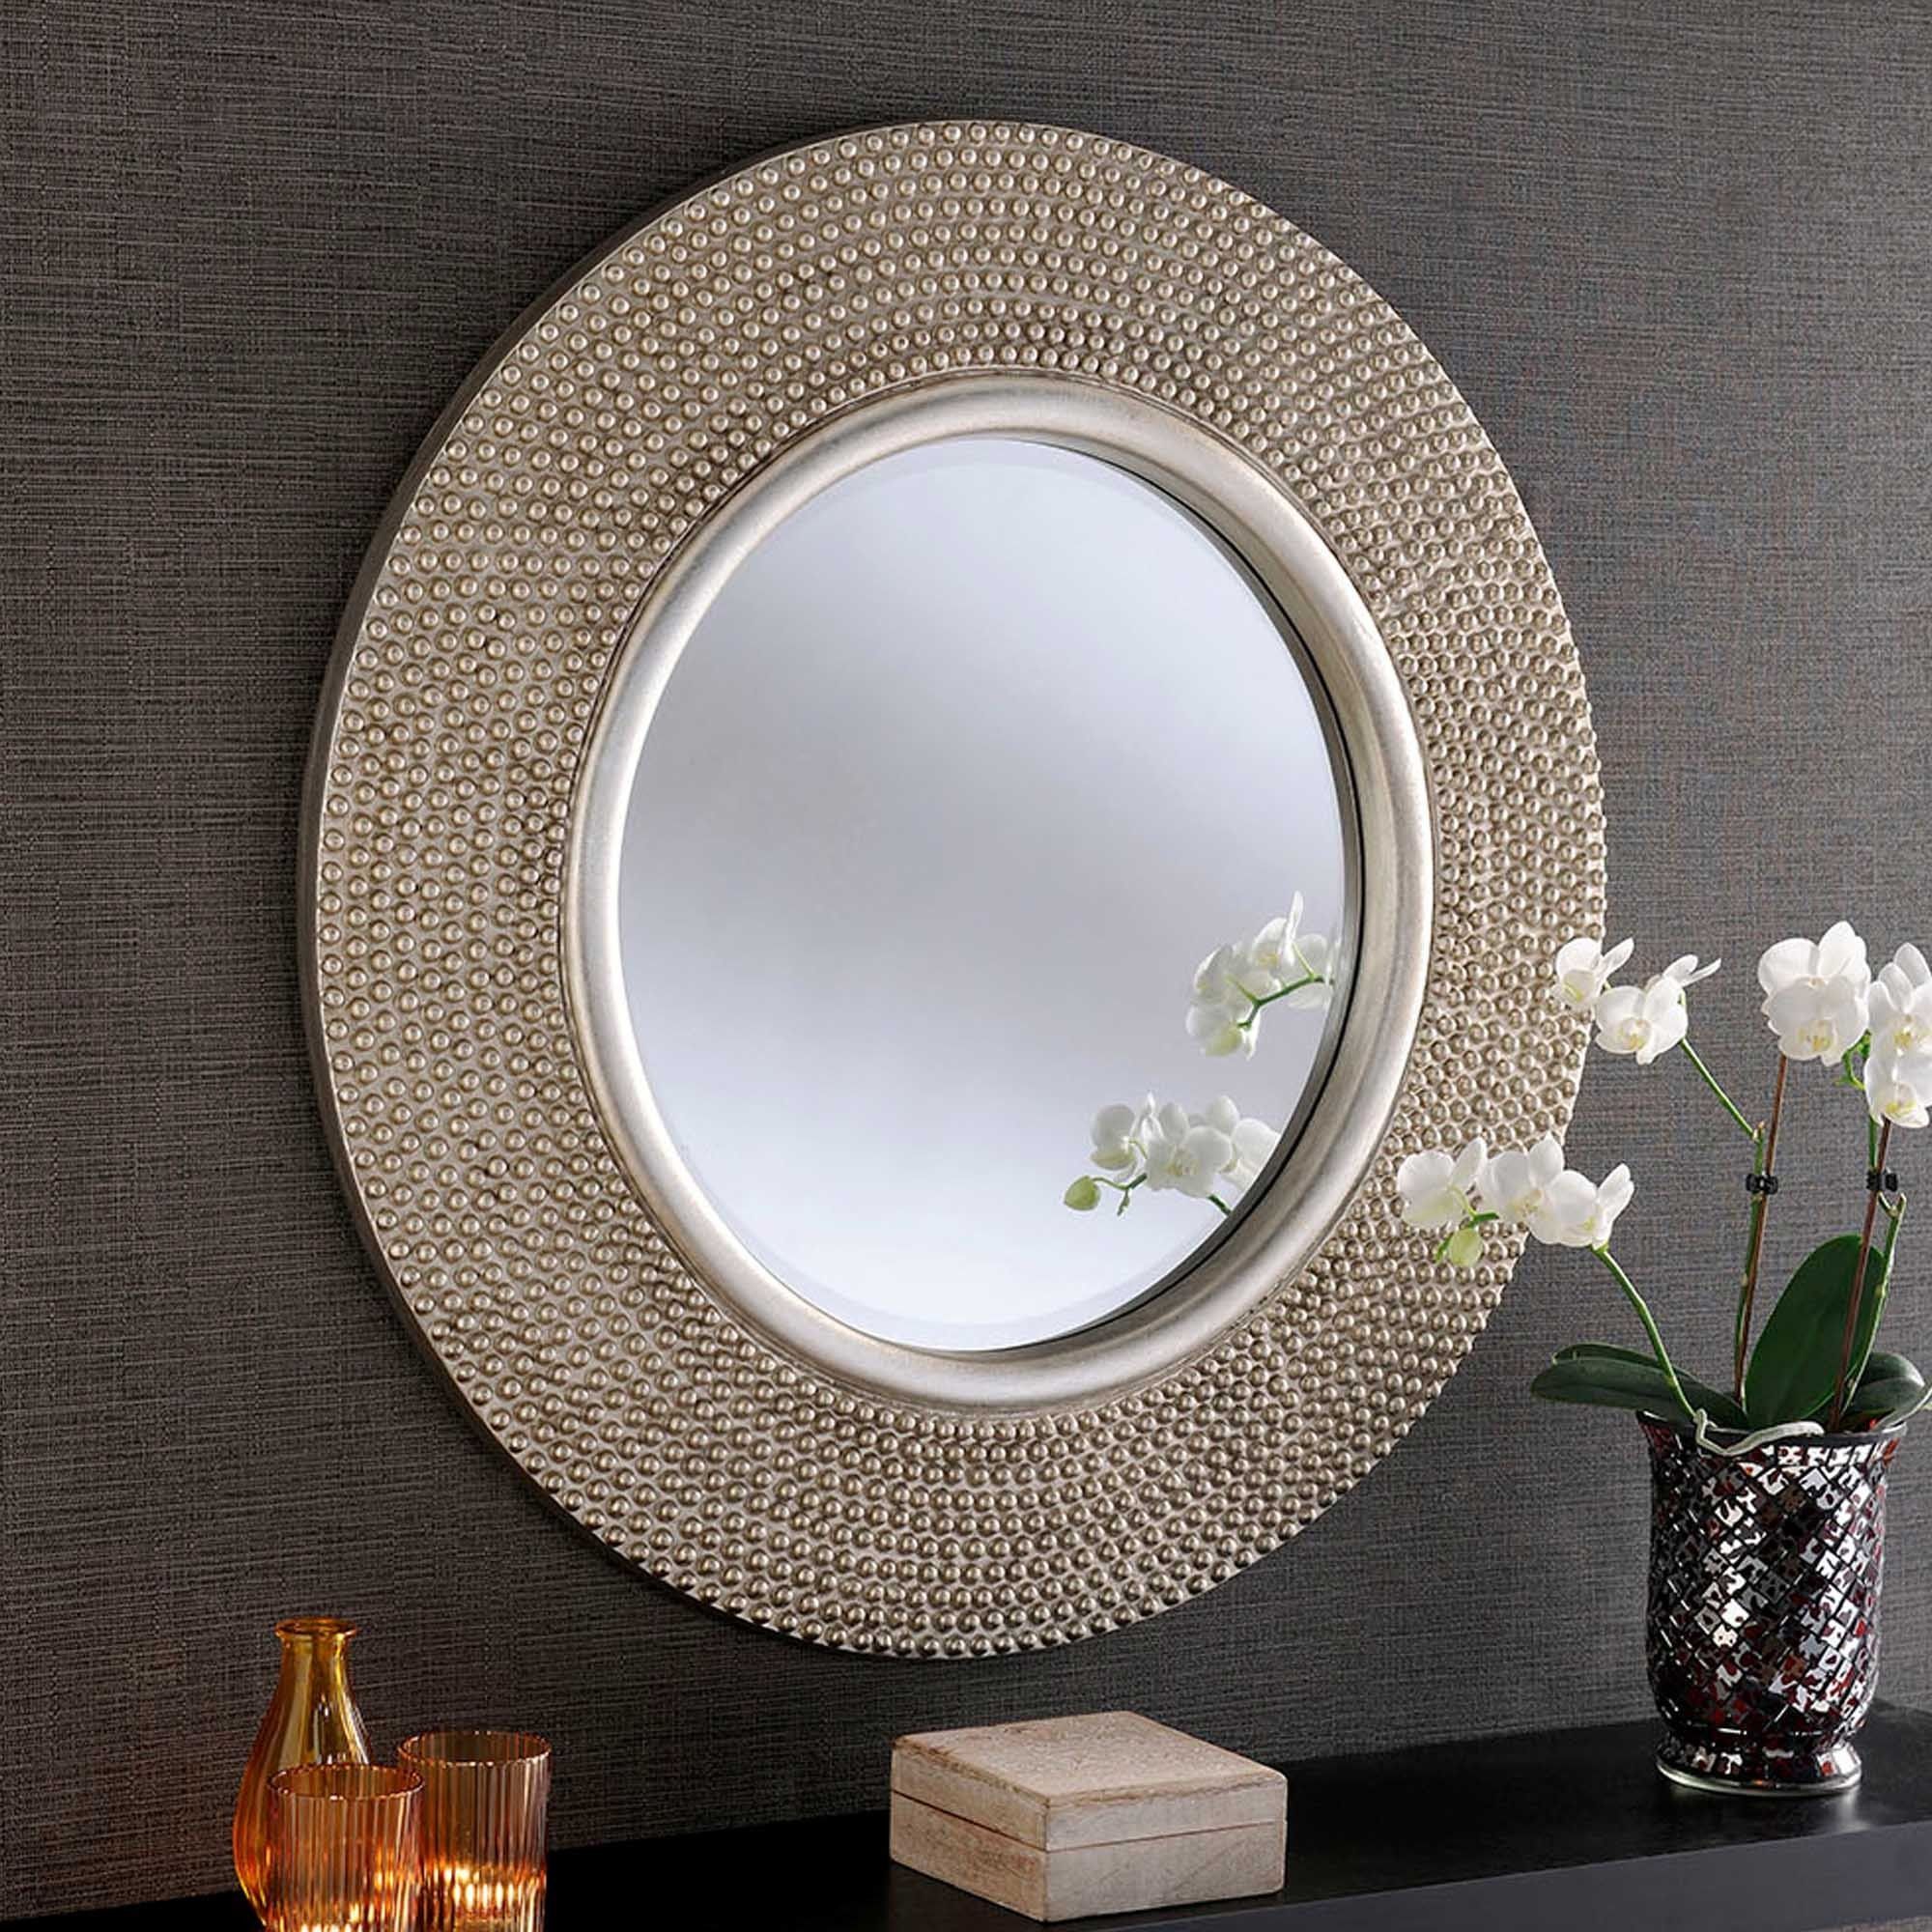 Circular Contemporary Silver Studded Wall Mirror | Wall Mirrors In Free Floating Printed Glass Round Wall Mirrors (View 11 of 15)